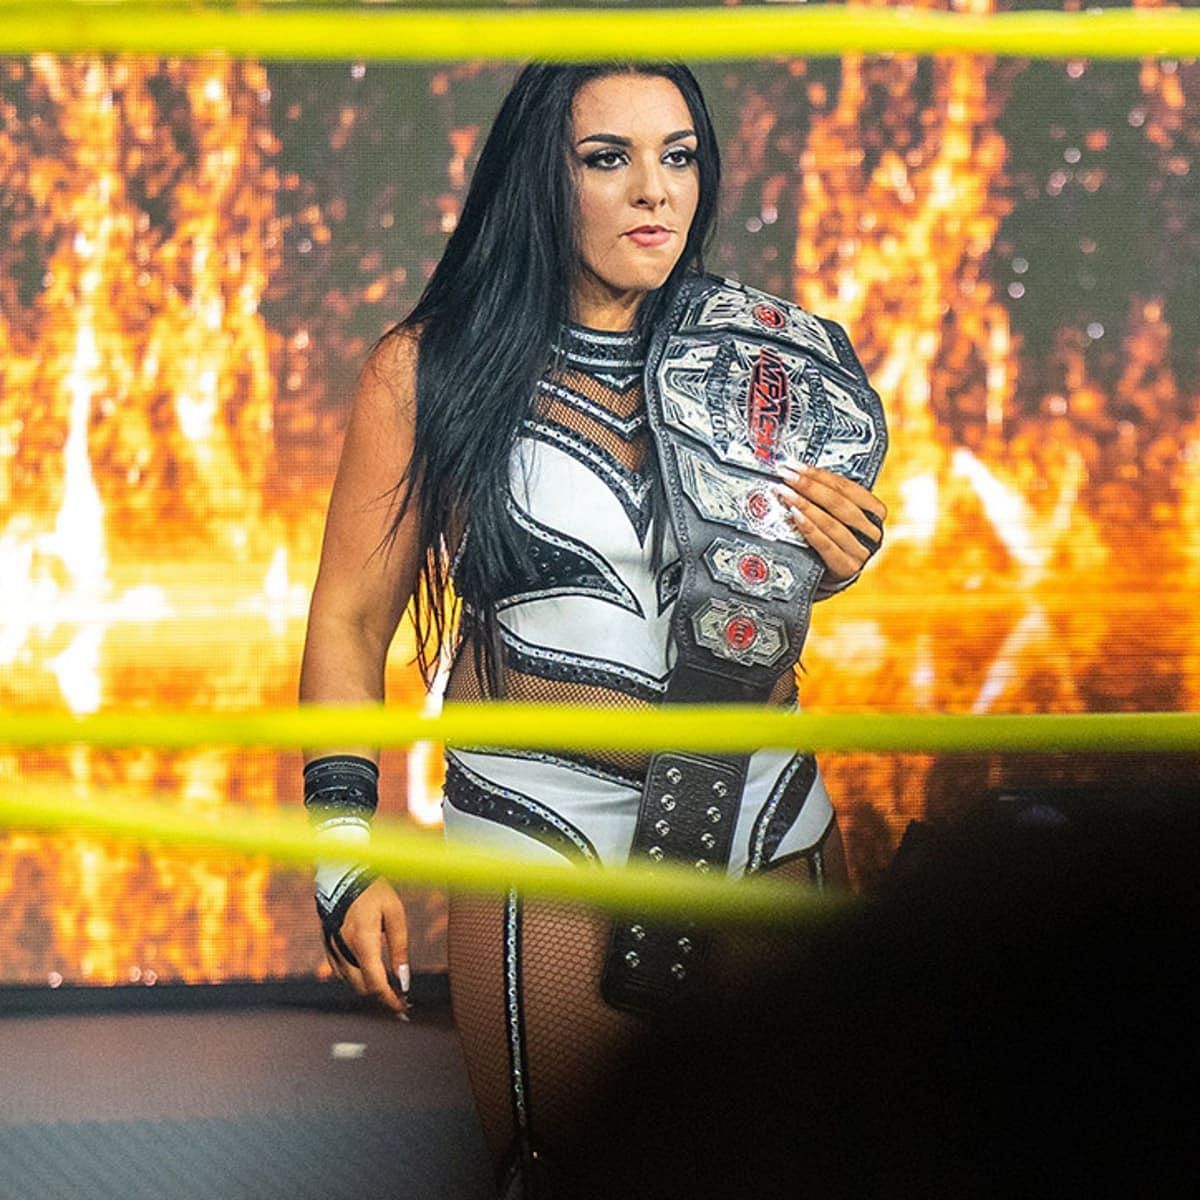 Deonna Purrazzo is usually holding a title in IMPACT.